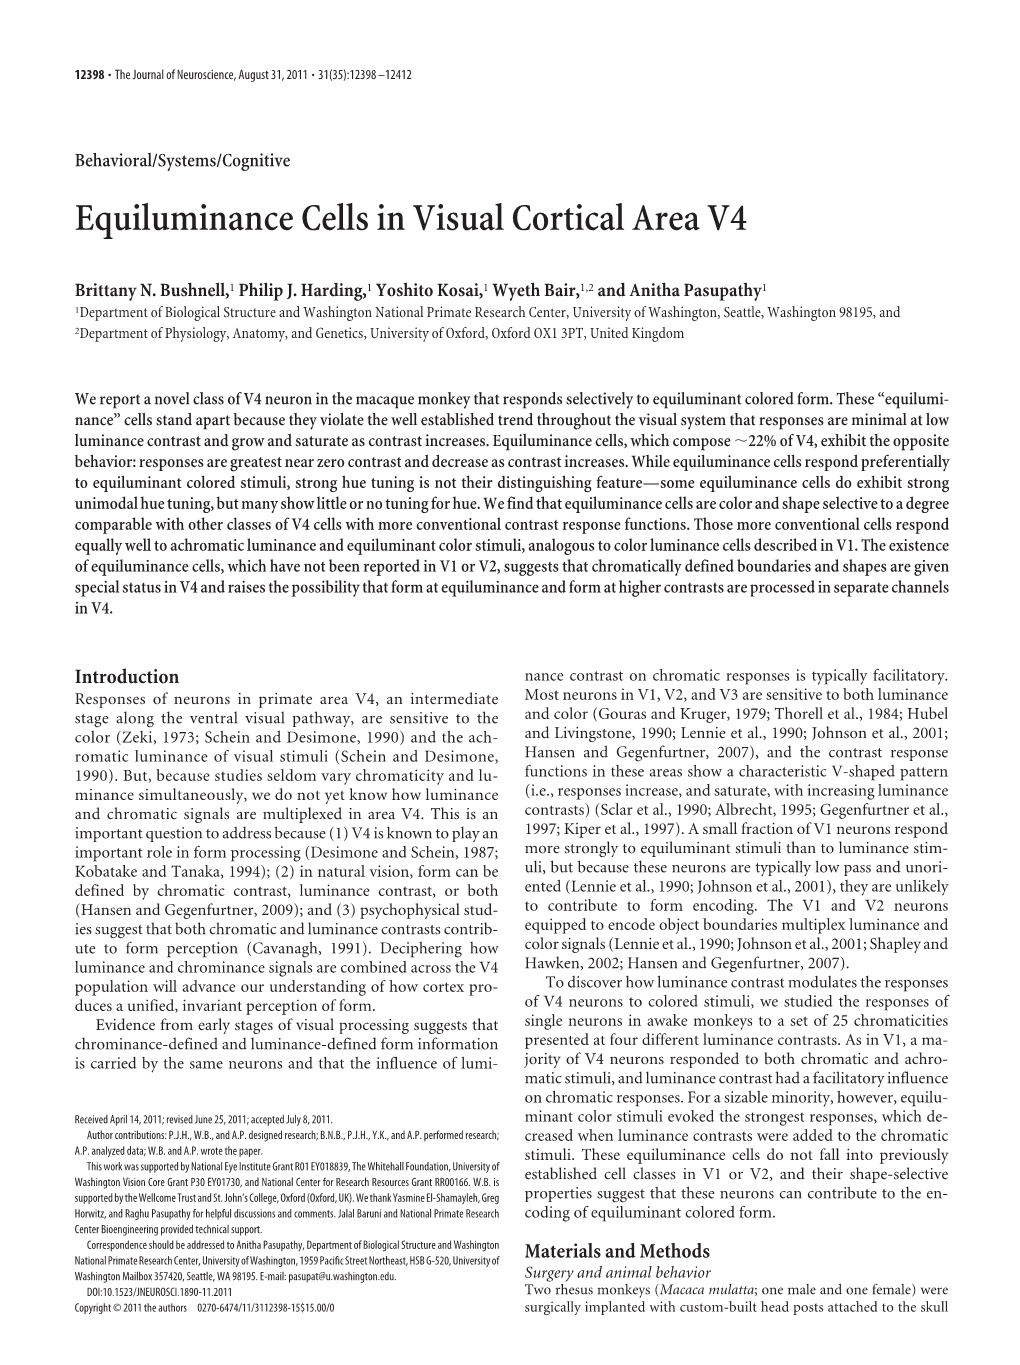 Equiluminance Cells in Visual Cortical Area V4